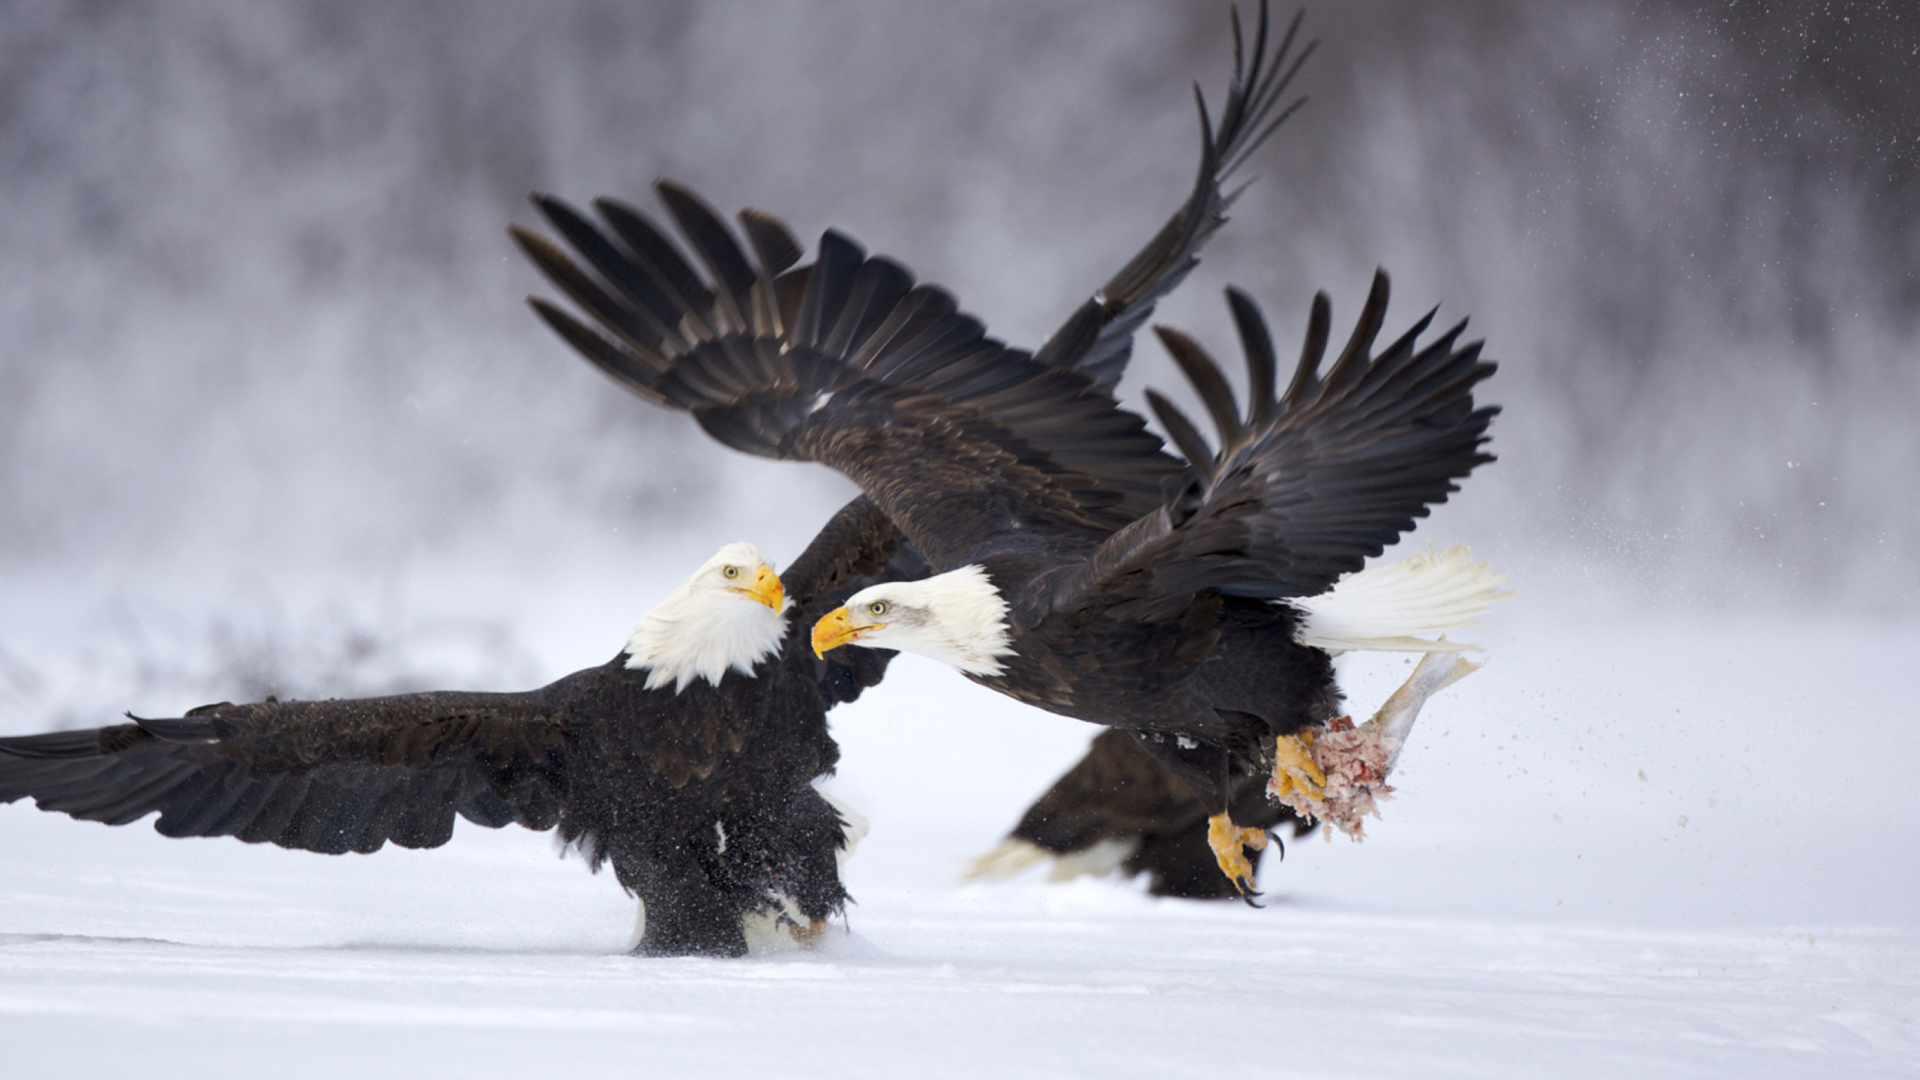 Two Eagles In Snow screenshot #1 1920x1080